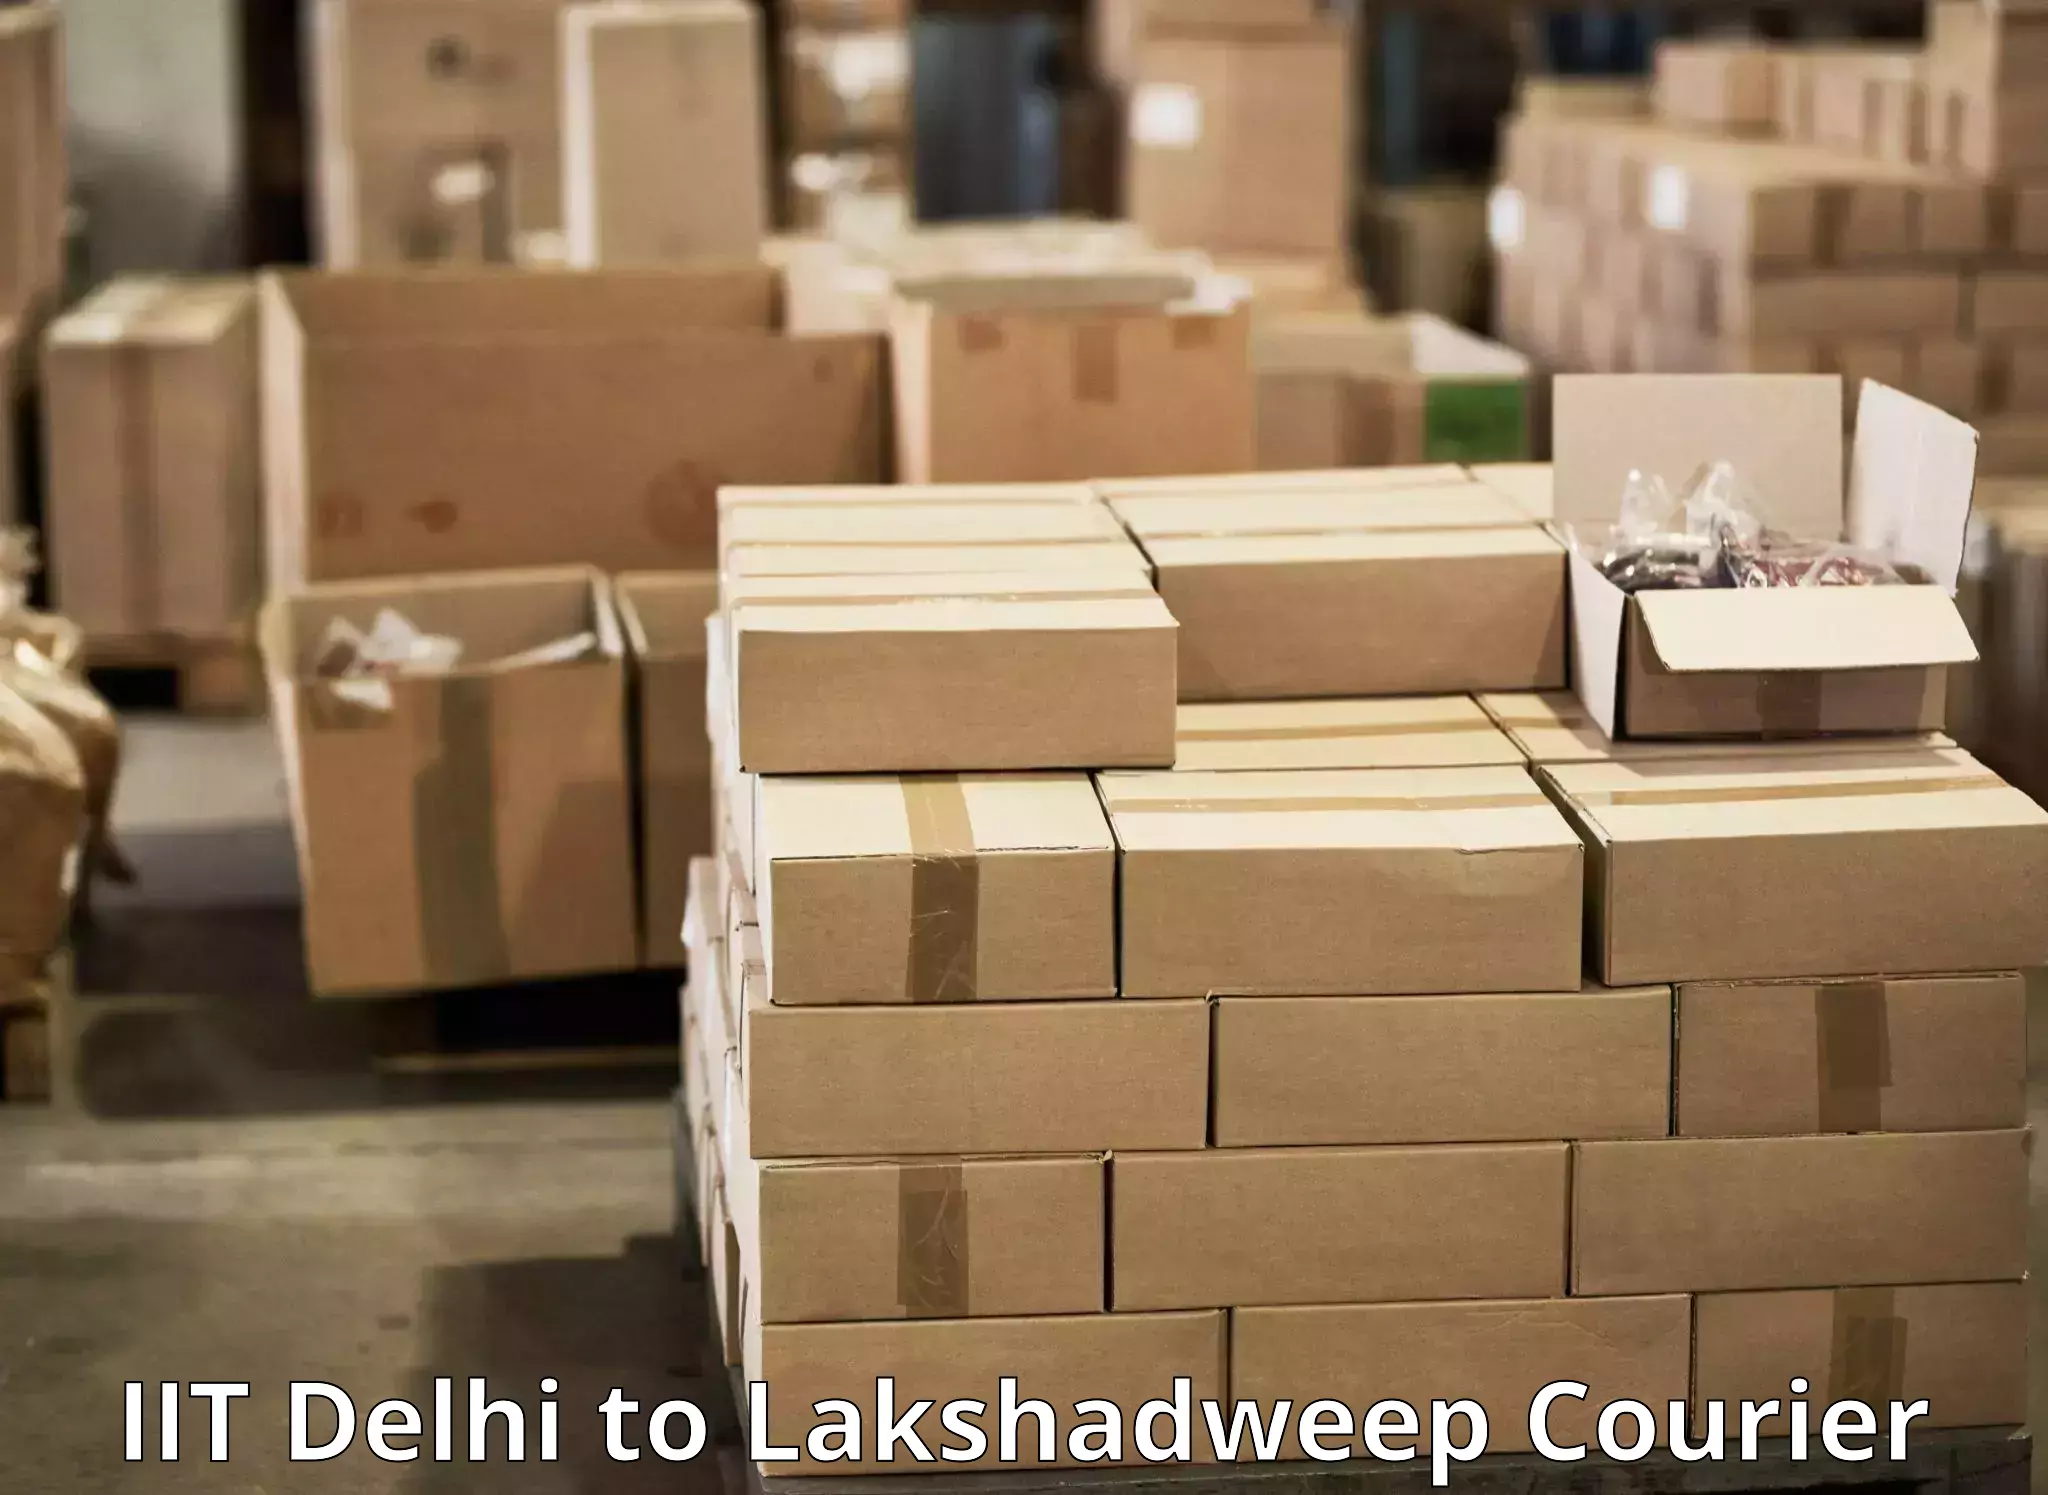 On-call courier service IIT Delhi to Lakshadweep